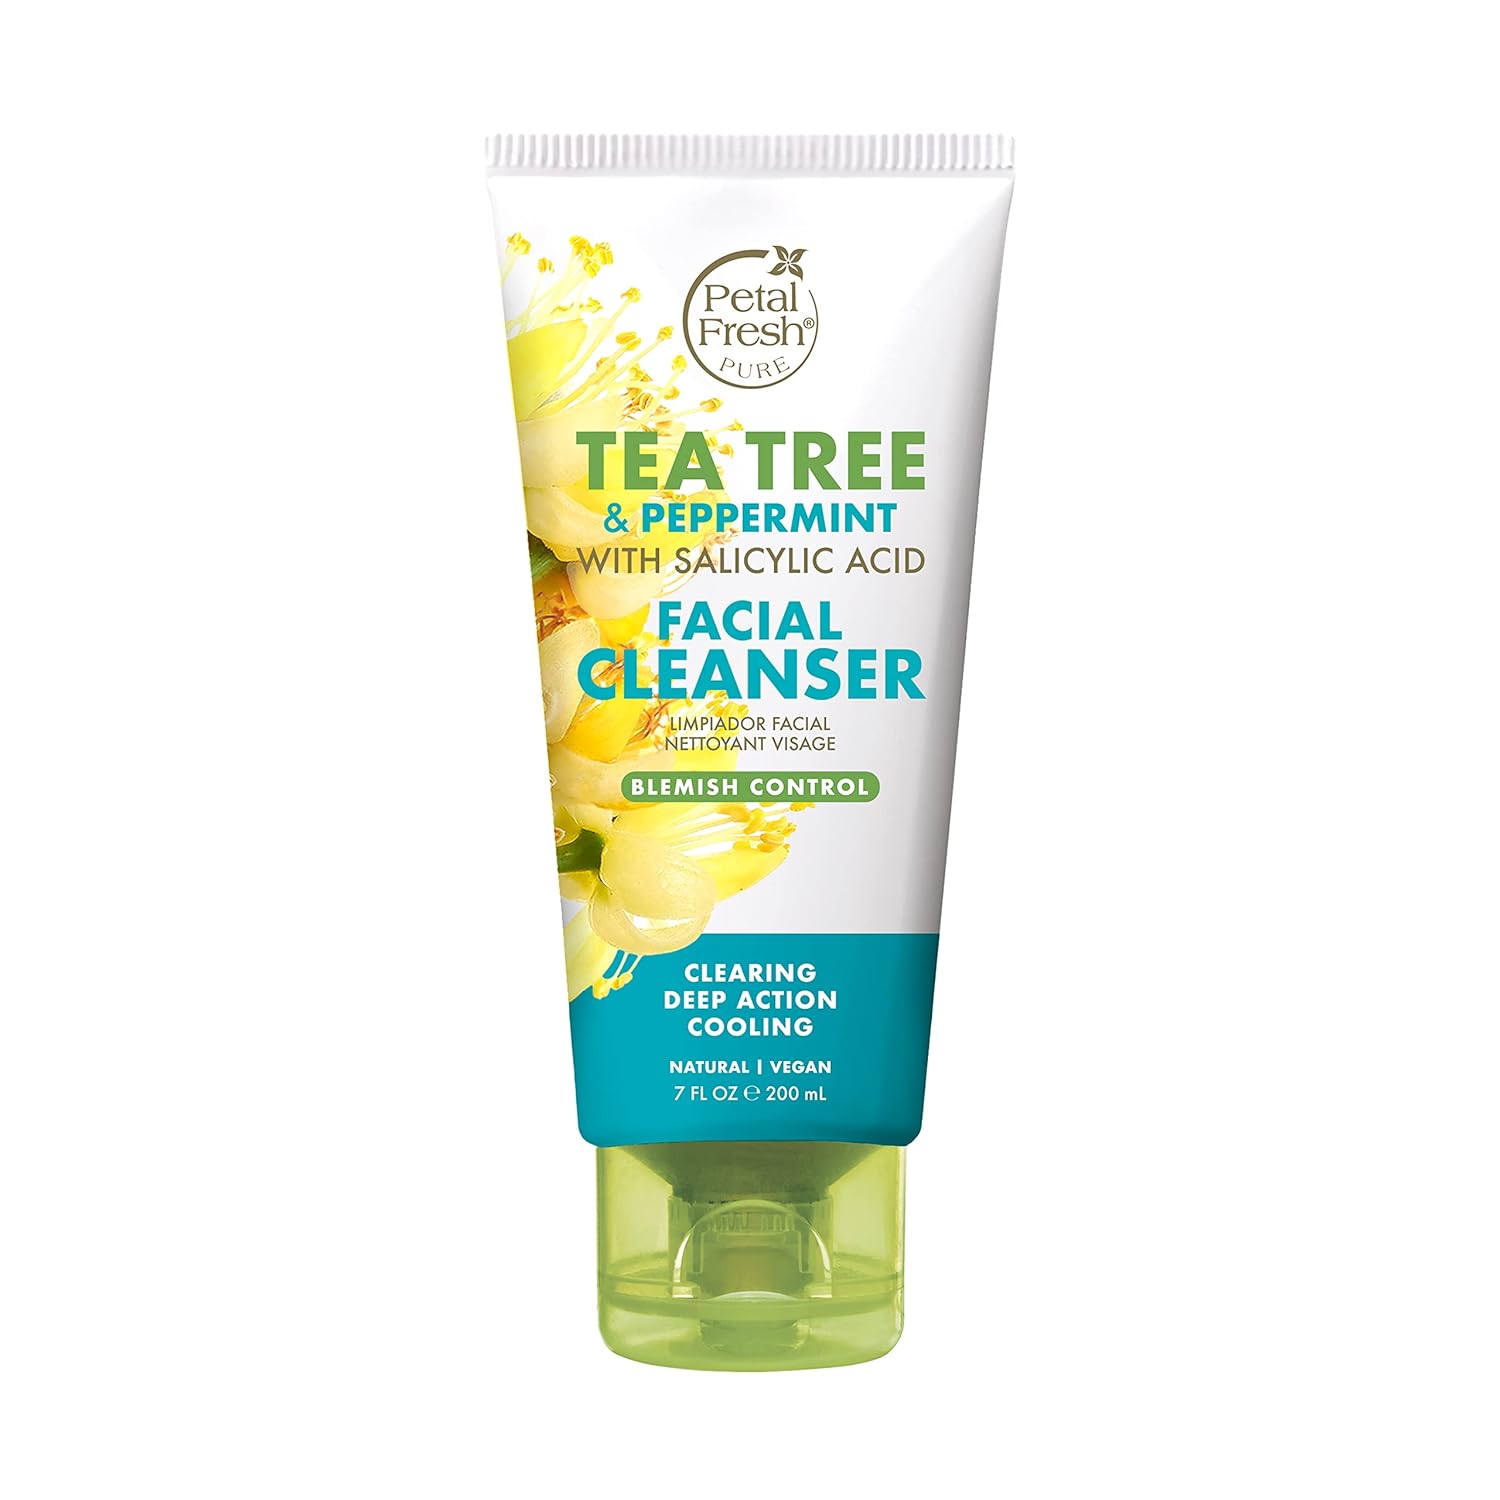 Petal Fresh Tea Tree & Peppermint Facial Cleanser, Blemish Control, Clean Skincare, Daily Facial Cleanser, Vegan and Cruelty Free, 5 oz